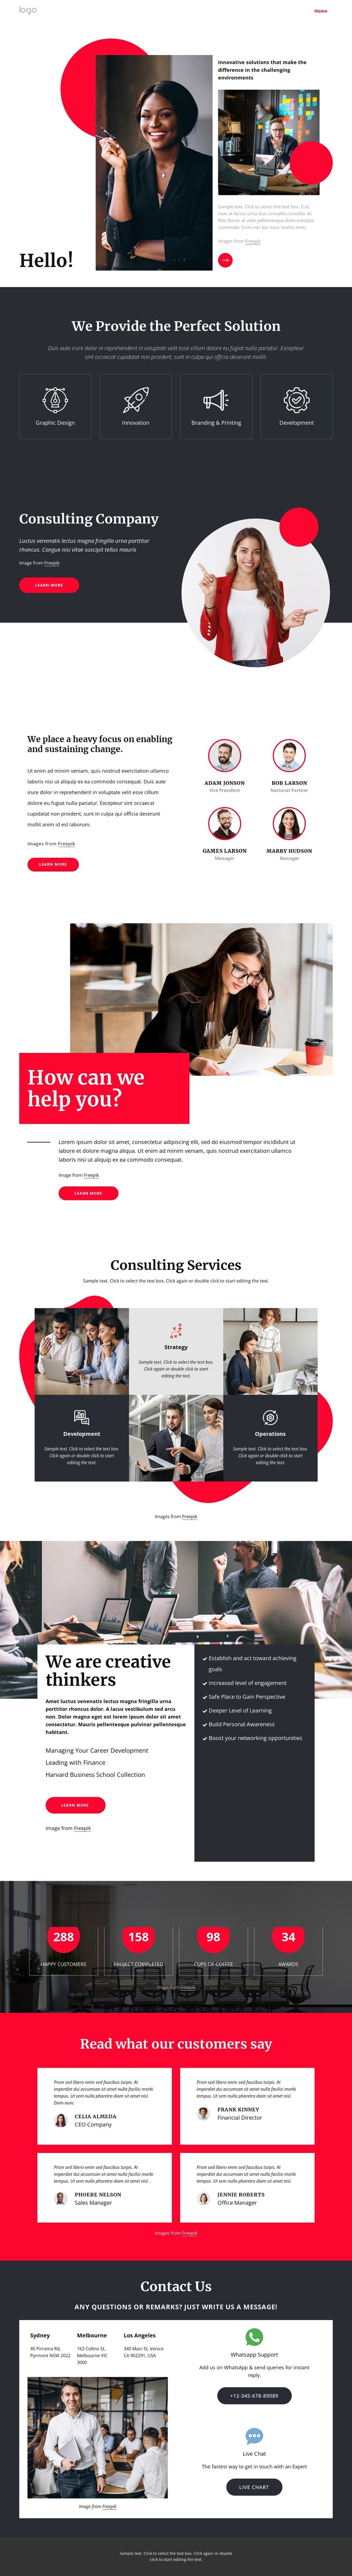 Consulting company NYC CSS Template